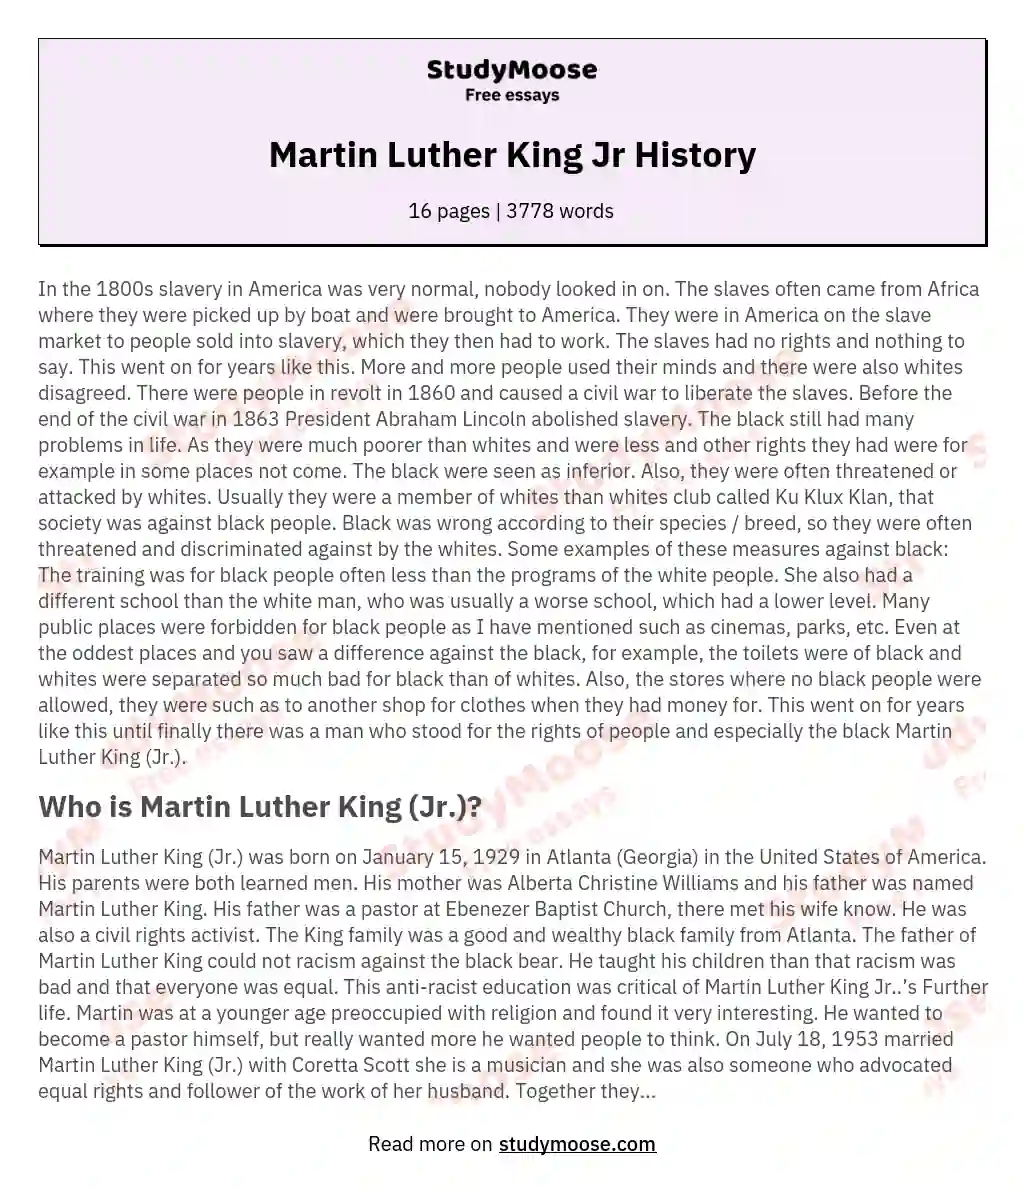 Martin Luther King Jr History essay